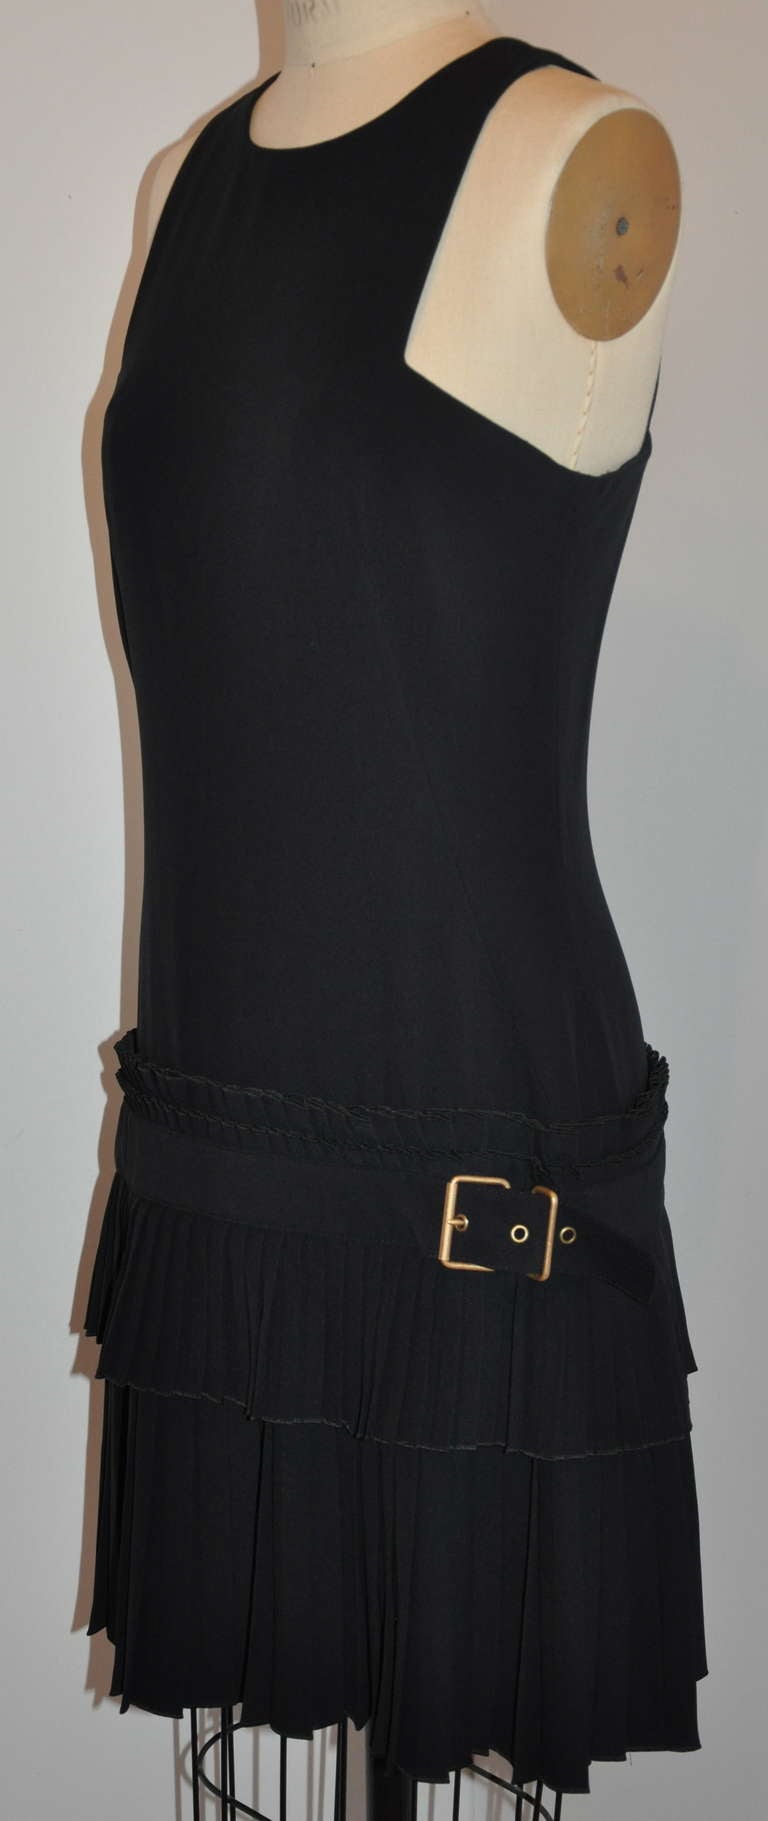 This wonderfully wicked Alexander McQueen cut-out two-tiered black dress is fully lined with black silk. Dress is accented with a black belt of same material and finished with a brass buckle.
   The front length measures 32 1/2